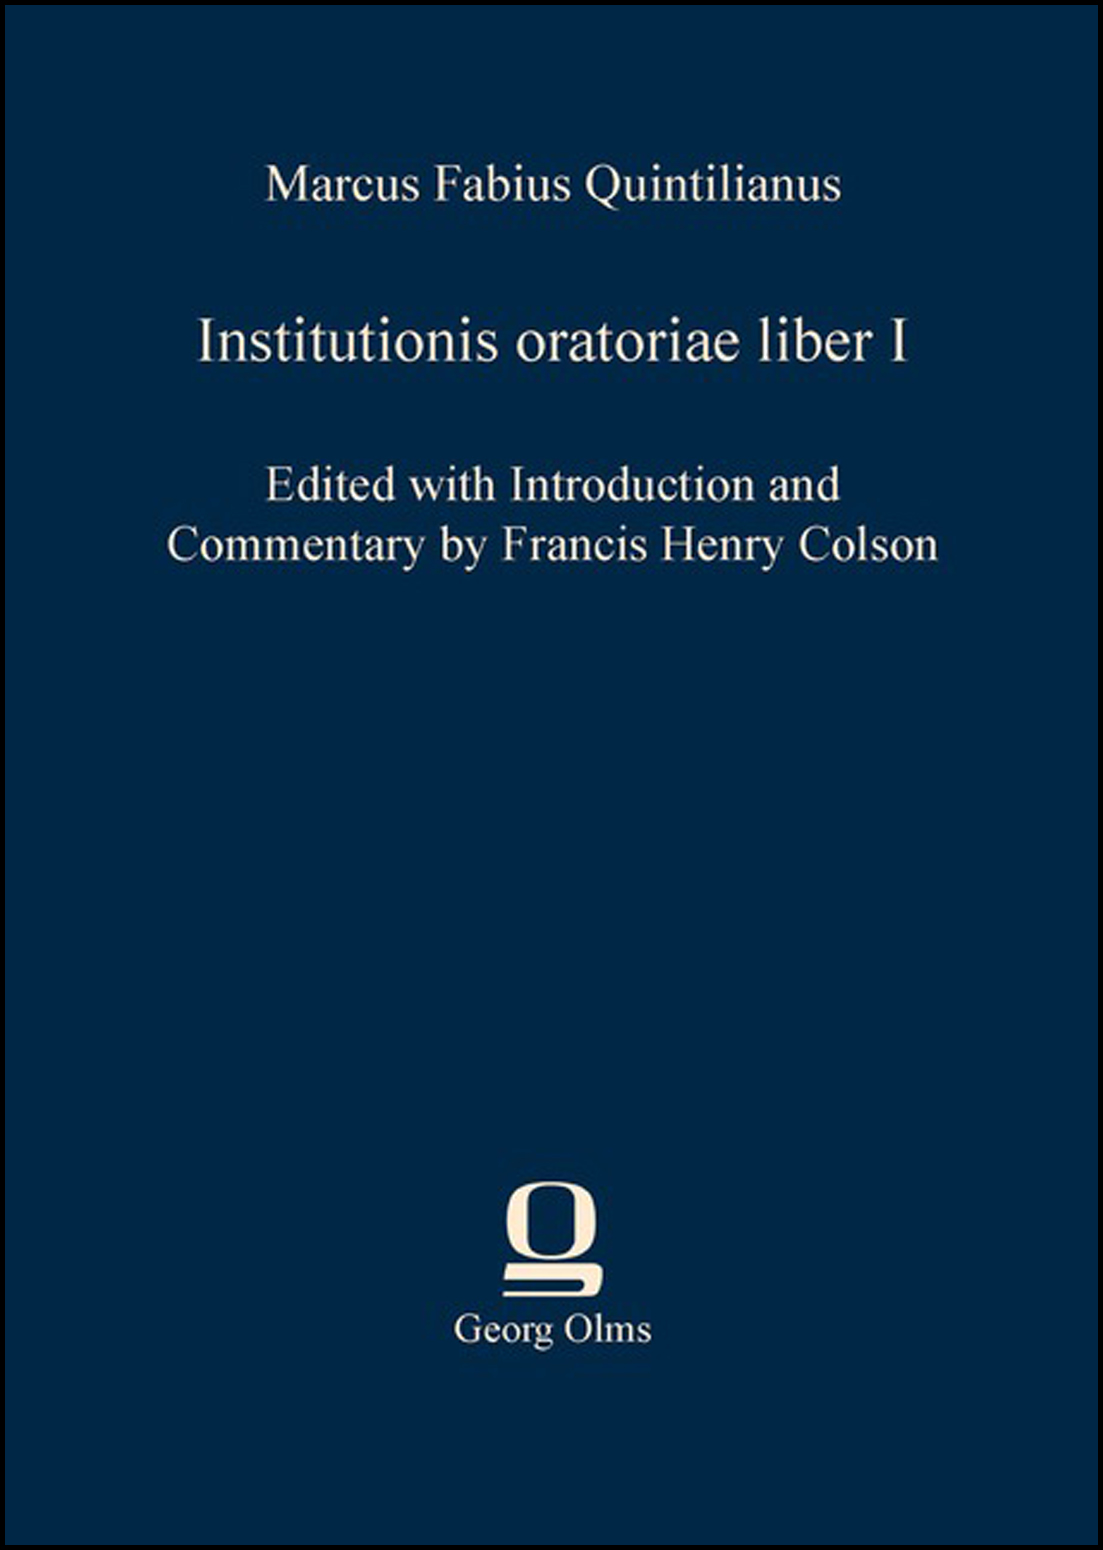 Institutionis oratoriae liber I, Edited with Introduction and Commentary by Francis Henry Colson - Quintilianus, Marcus Fabius